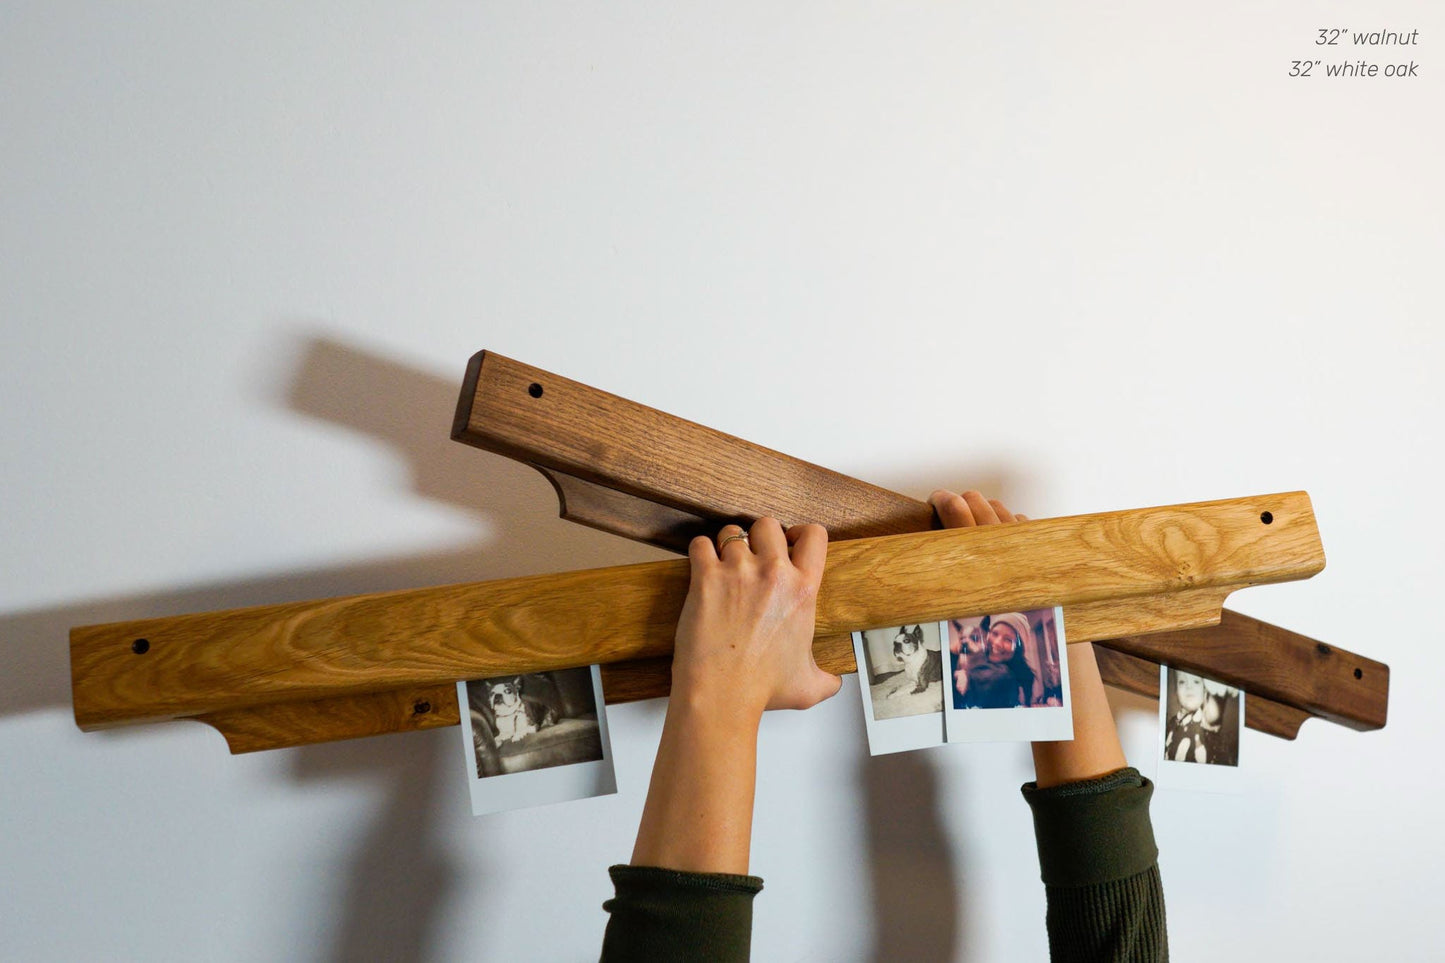  The Gravity Bar, by Biglow Woodcraft; a wooden support for papers, photographs and images. Two wooden bars with photographs in the hands of a woman. Hardwood Walnut and White oak